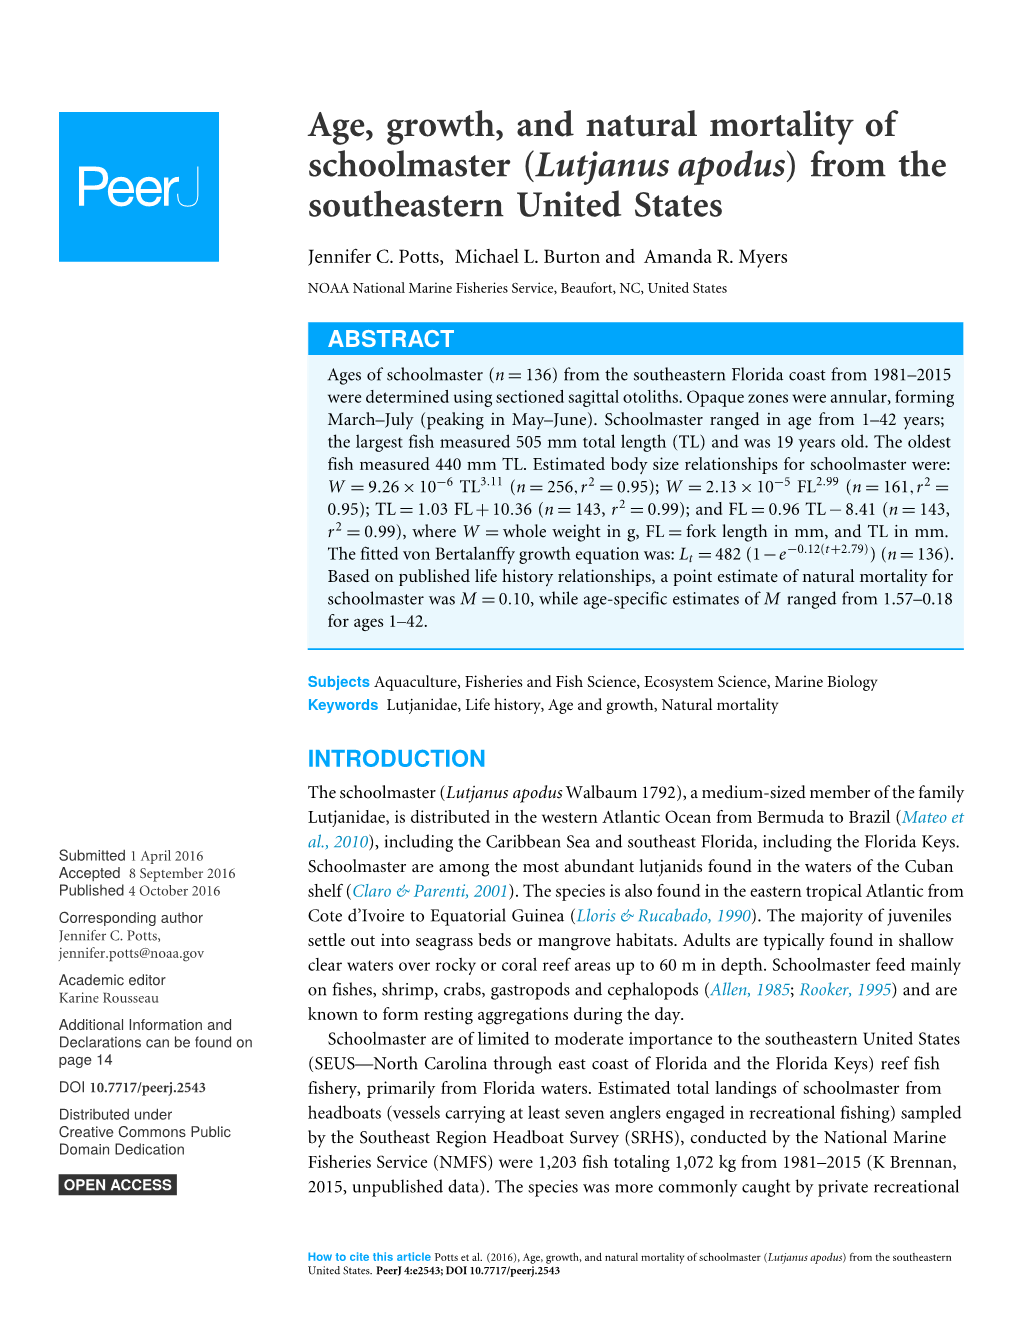 Age, Growth, and Natural Mortality of Schoolmaster (Lutjanus Apodus) from the Southeastern United States